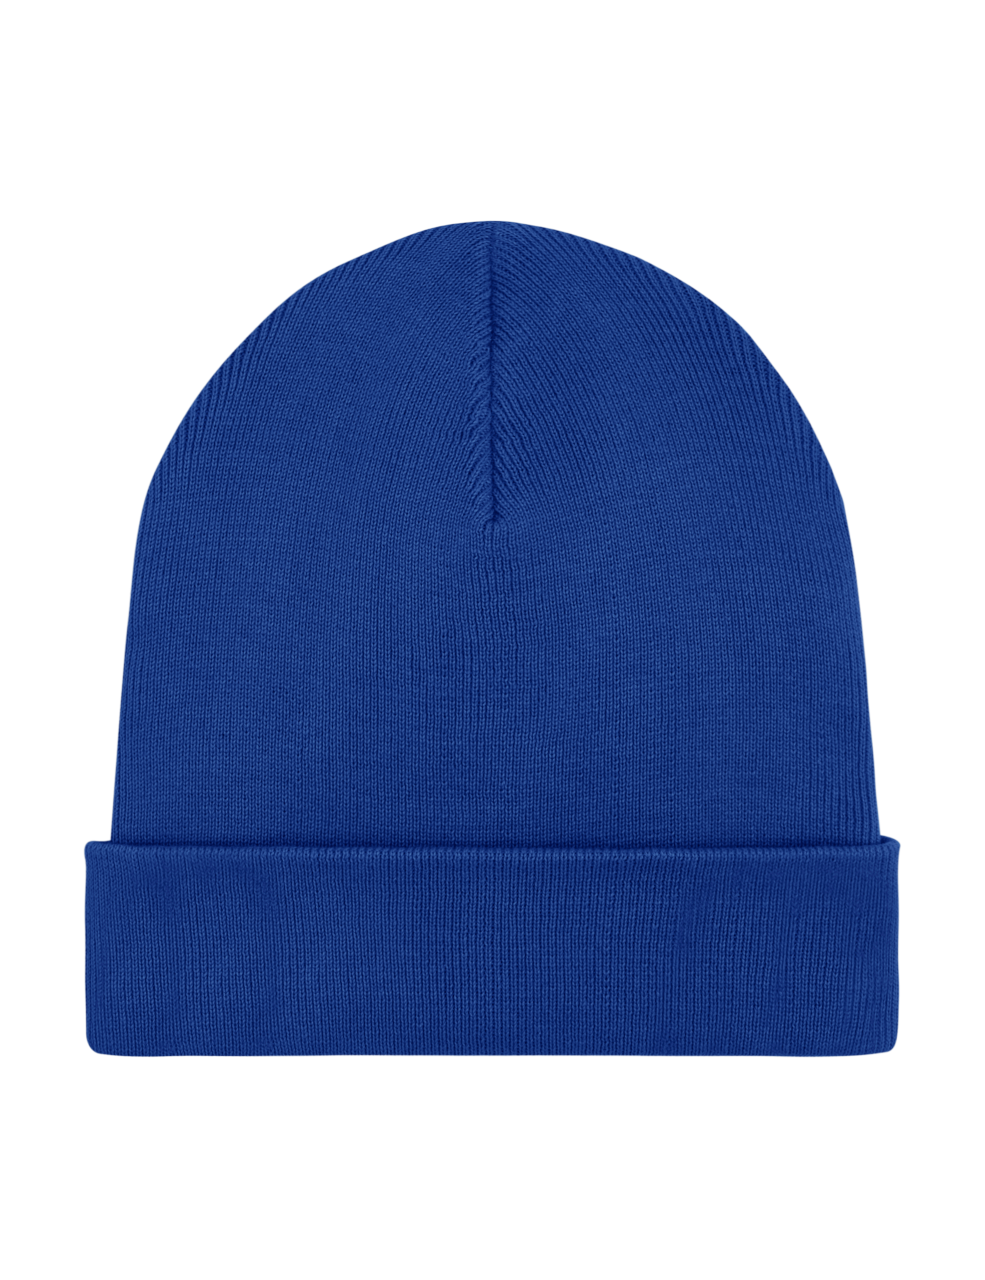 RibBeanie_WorkerBlue.png